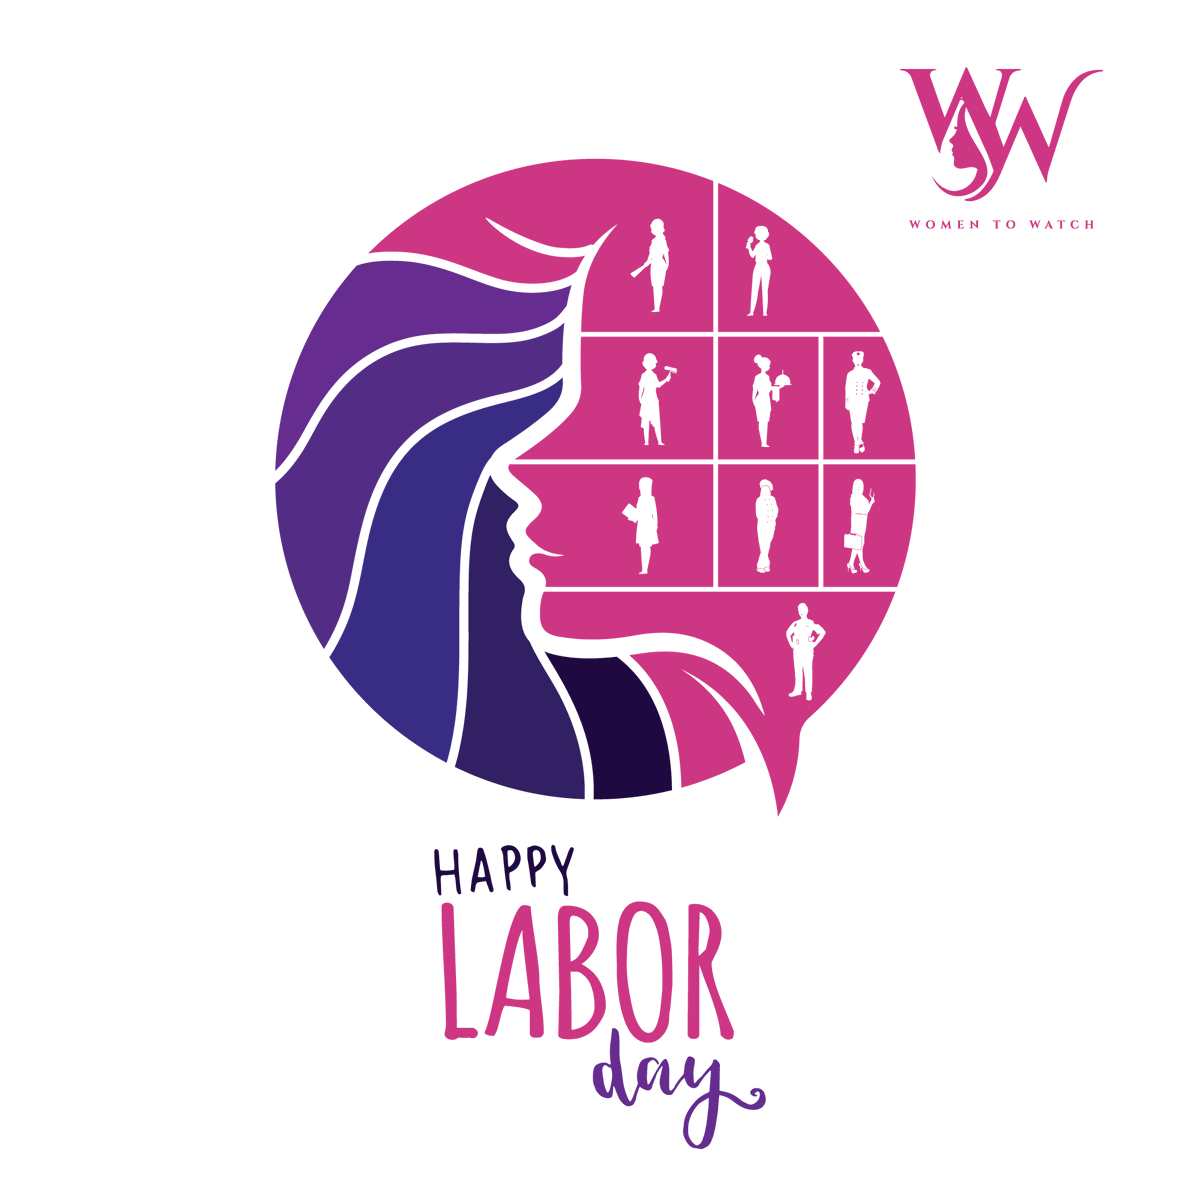 Breaking barriers in the boardroom, leading with passion and purpose, or making a difference in your community, your efforts do not go unnoticed. Take this day to rest, recharge, and reflect on all that you've accomplished. You are the backbone of our economy, and we salute you!